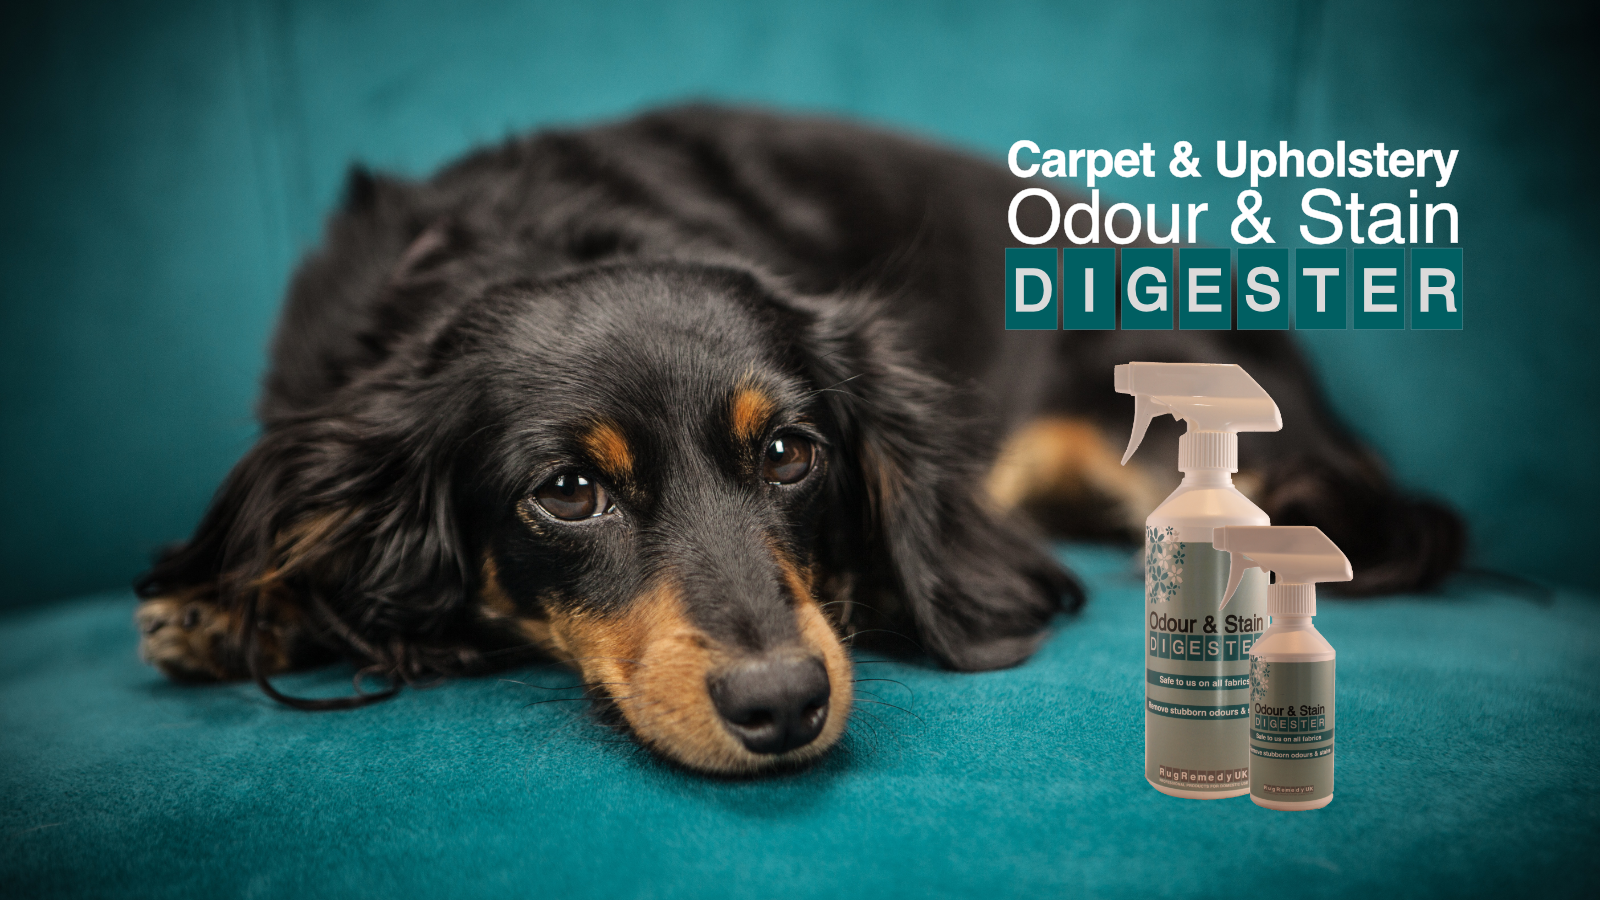 Cute poodle puppy sitting on a sofa with Odour and Stain Digester bottles.